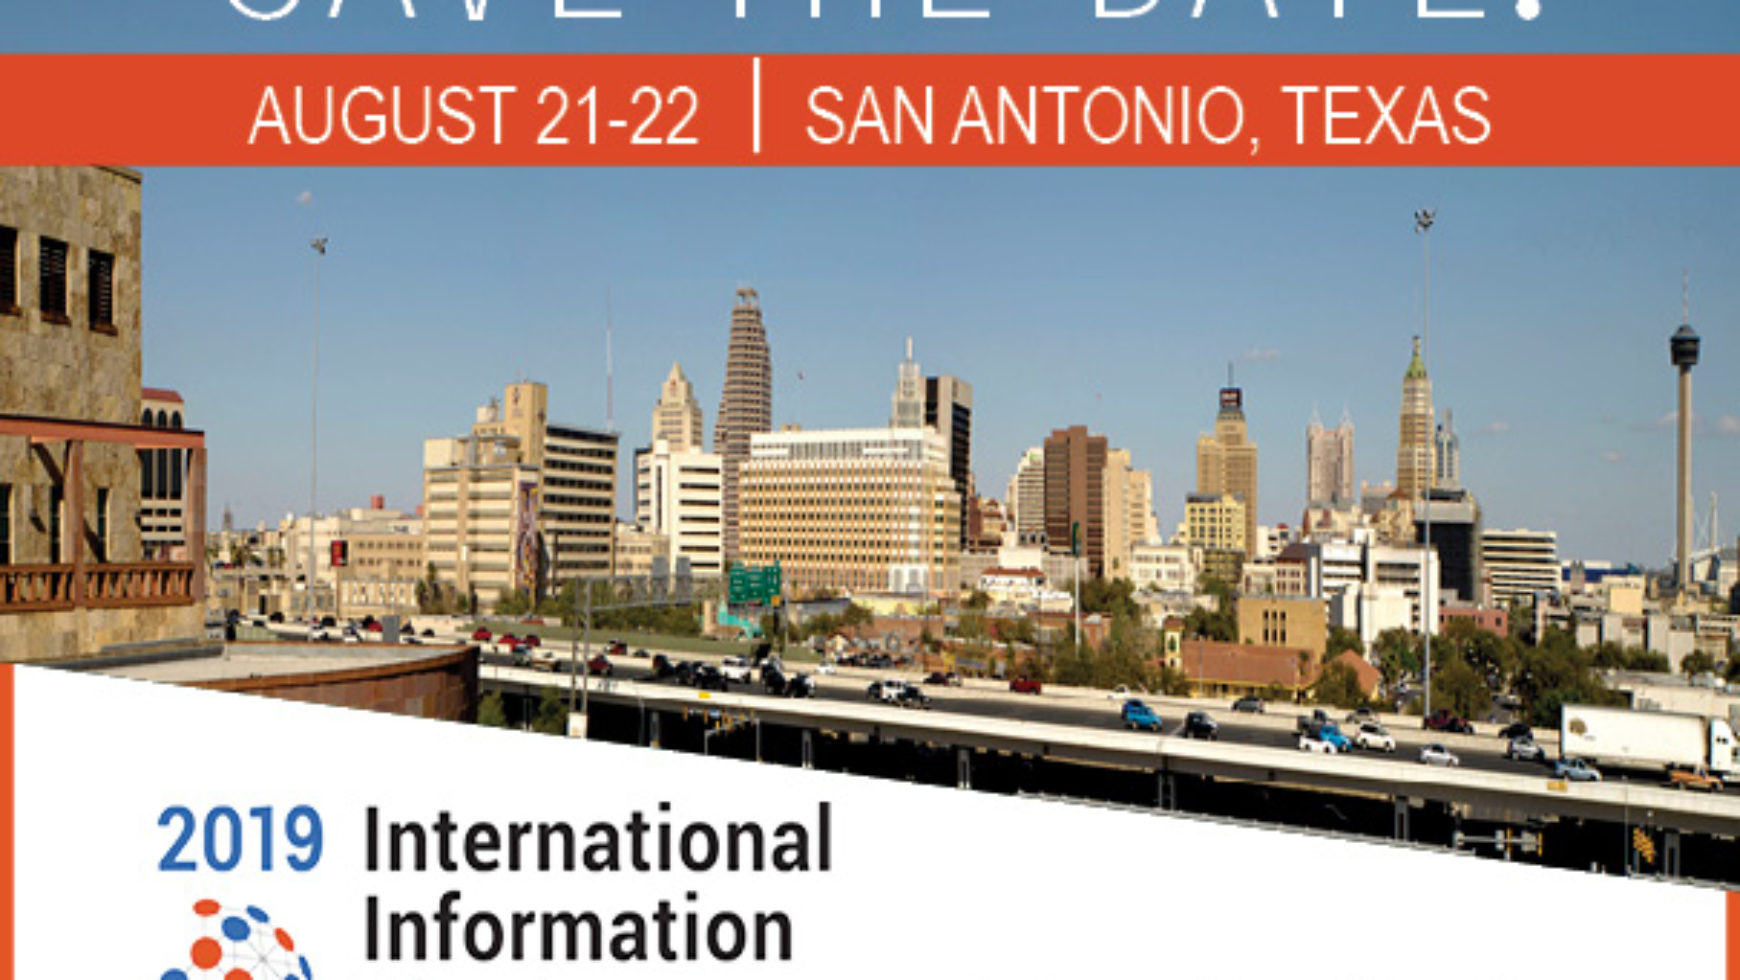 ISAO Standards Organization Announces Third Annual International Information Sharing Conference